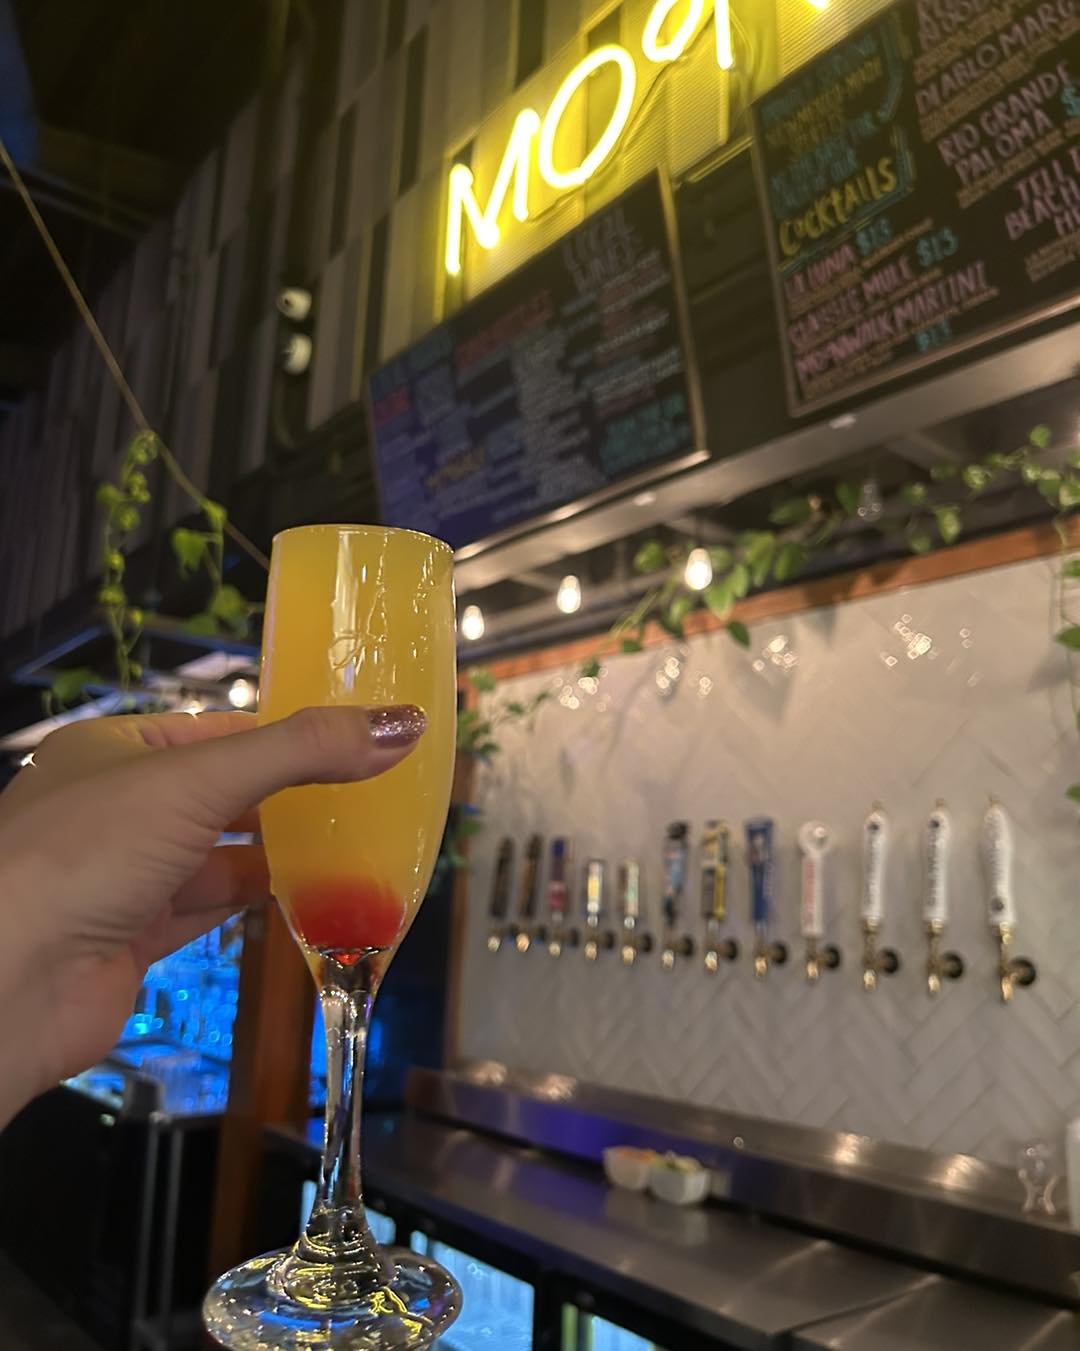 Psssst. Are mimosas part of your Mother&rsquo;s Day tradition? We gotcha. $9 mimosas all day at Moonwalk Bar. See your bartender for deets.
#MothersDayABQ